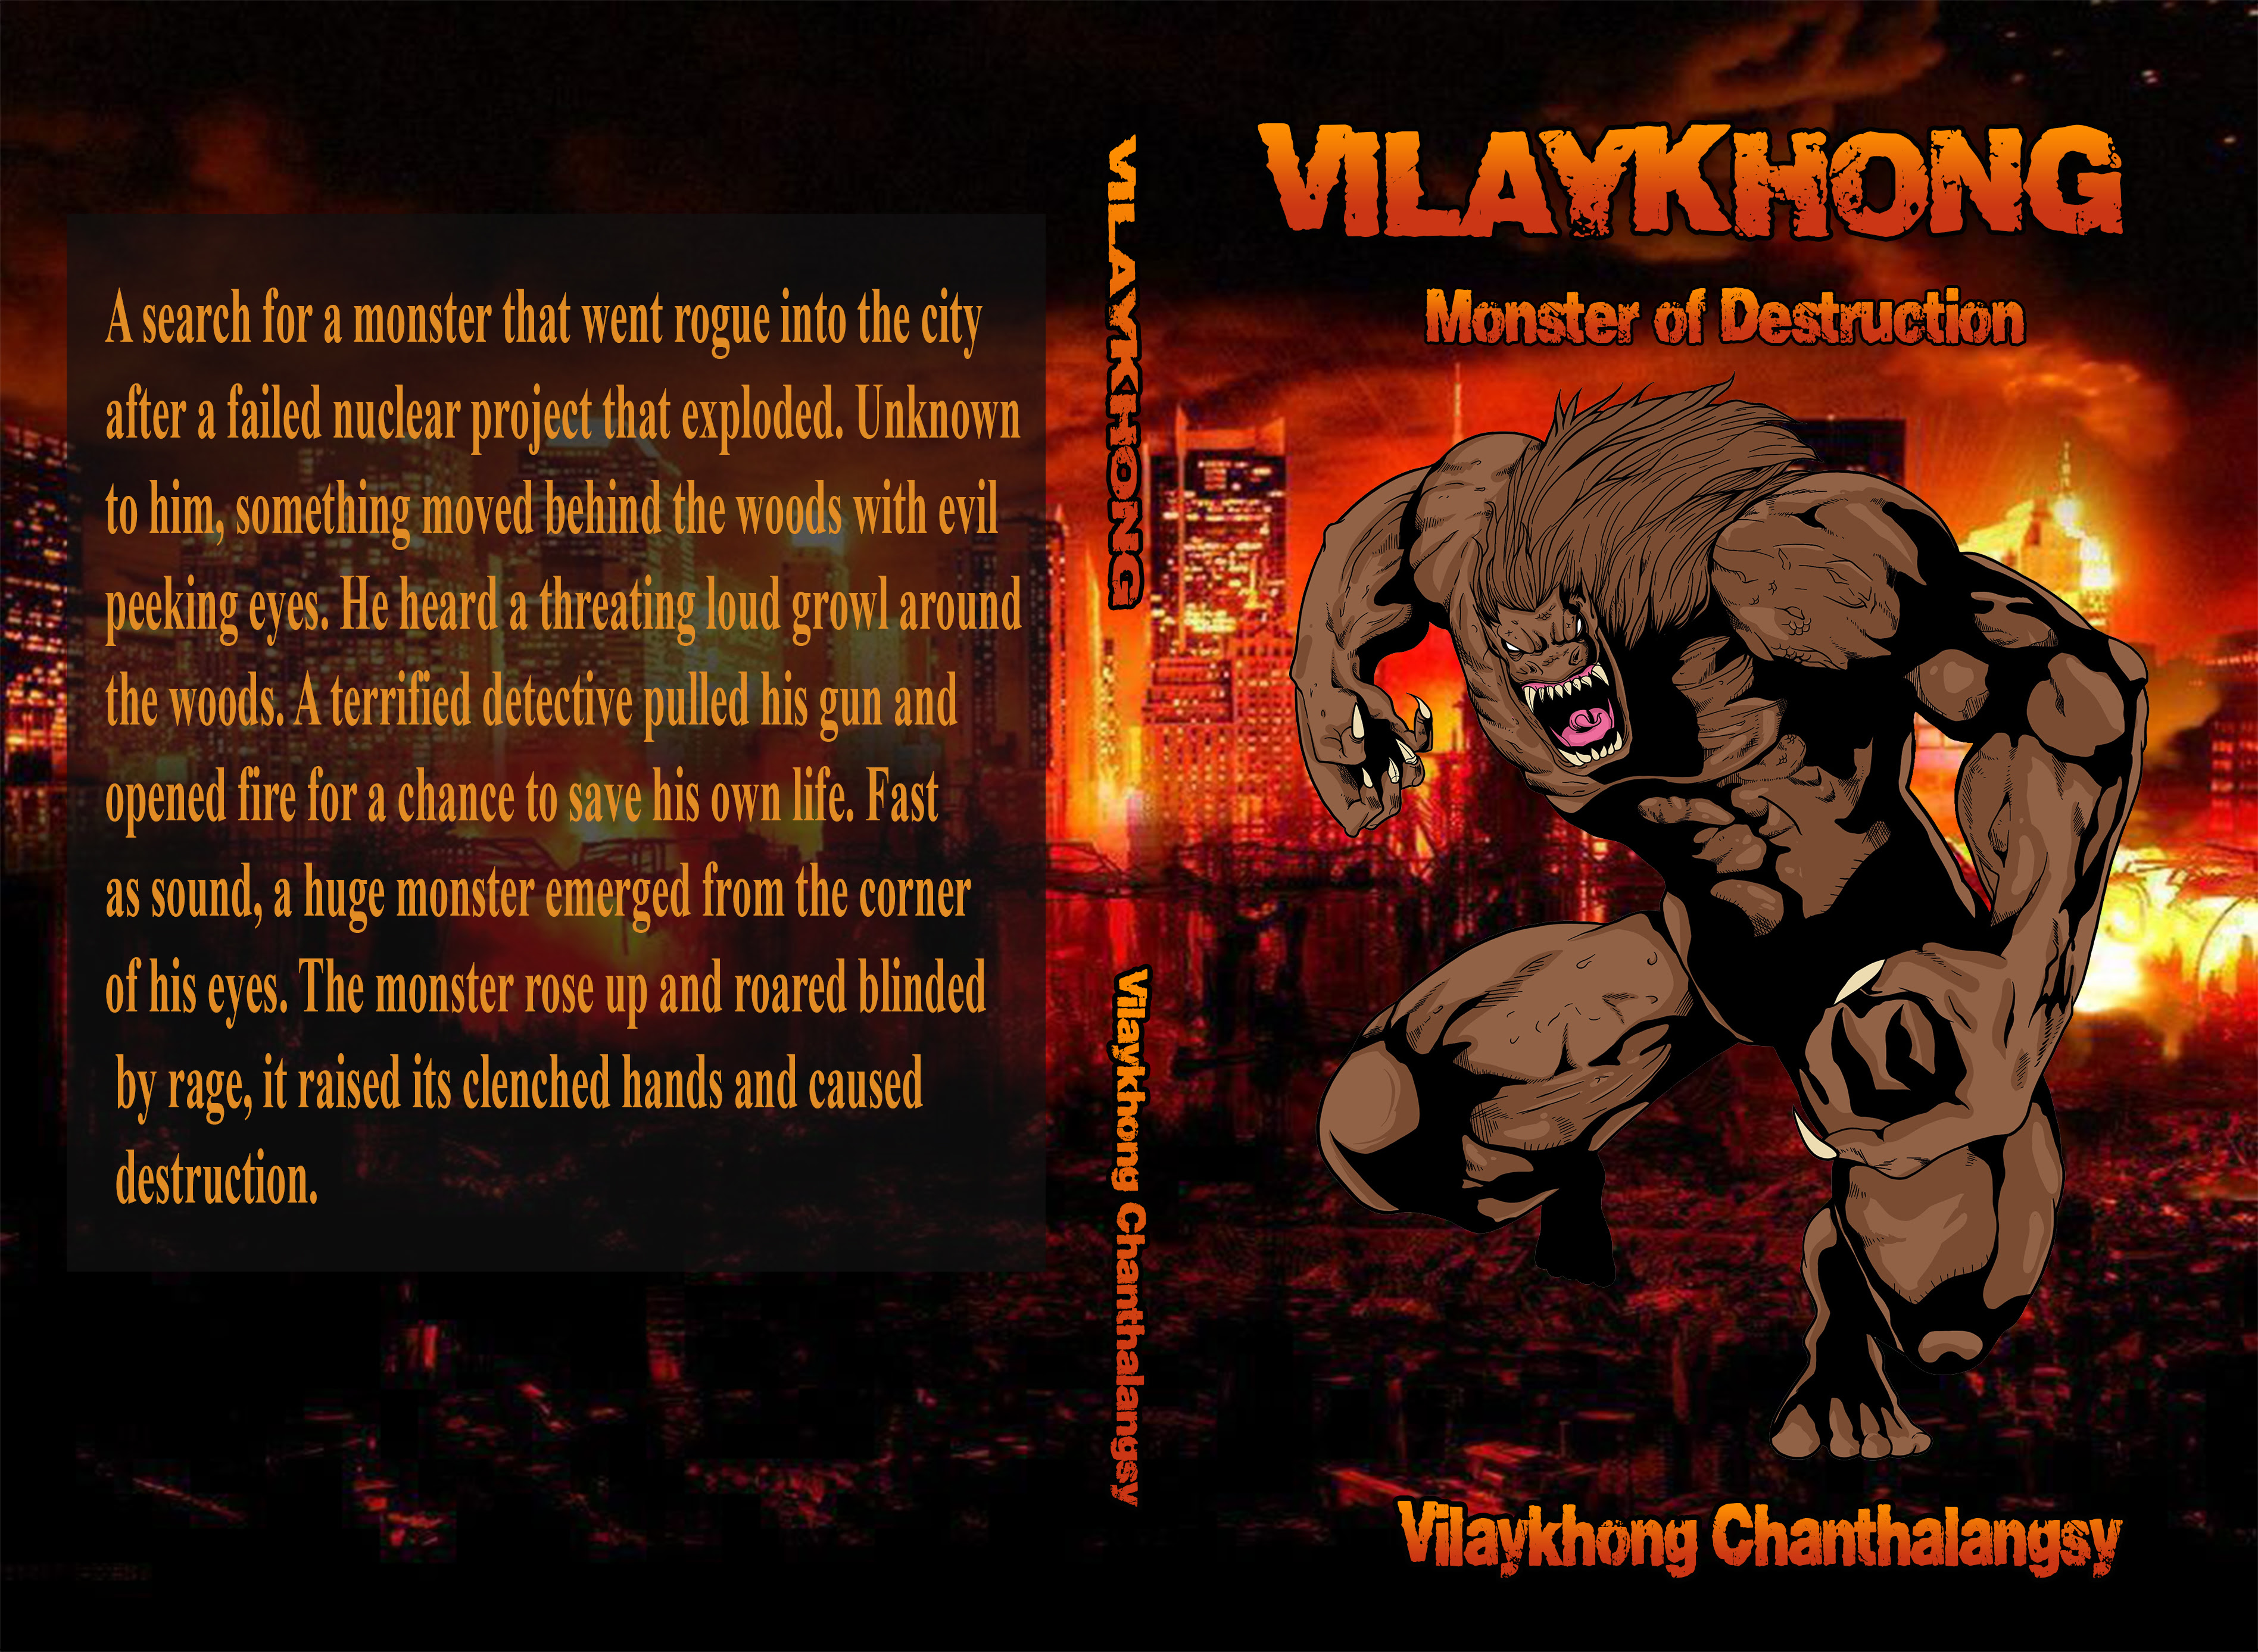 VILAYKHONG Monster Of Destruction proof of existence on the blockchain